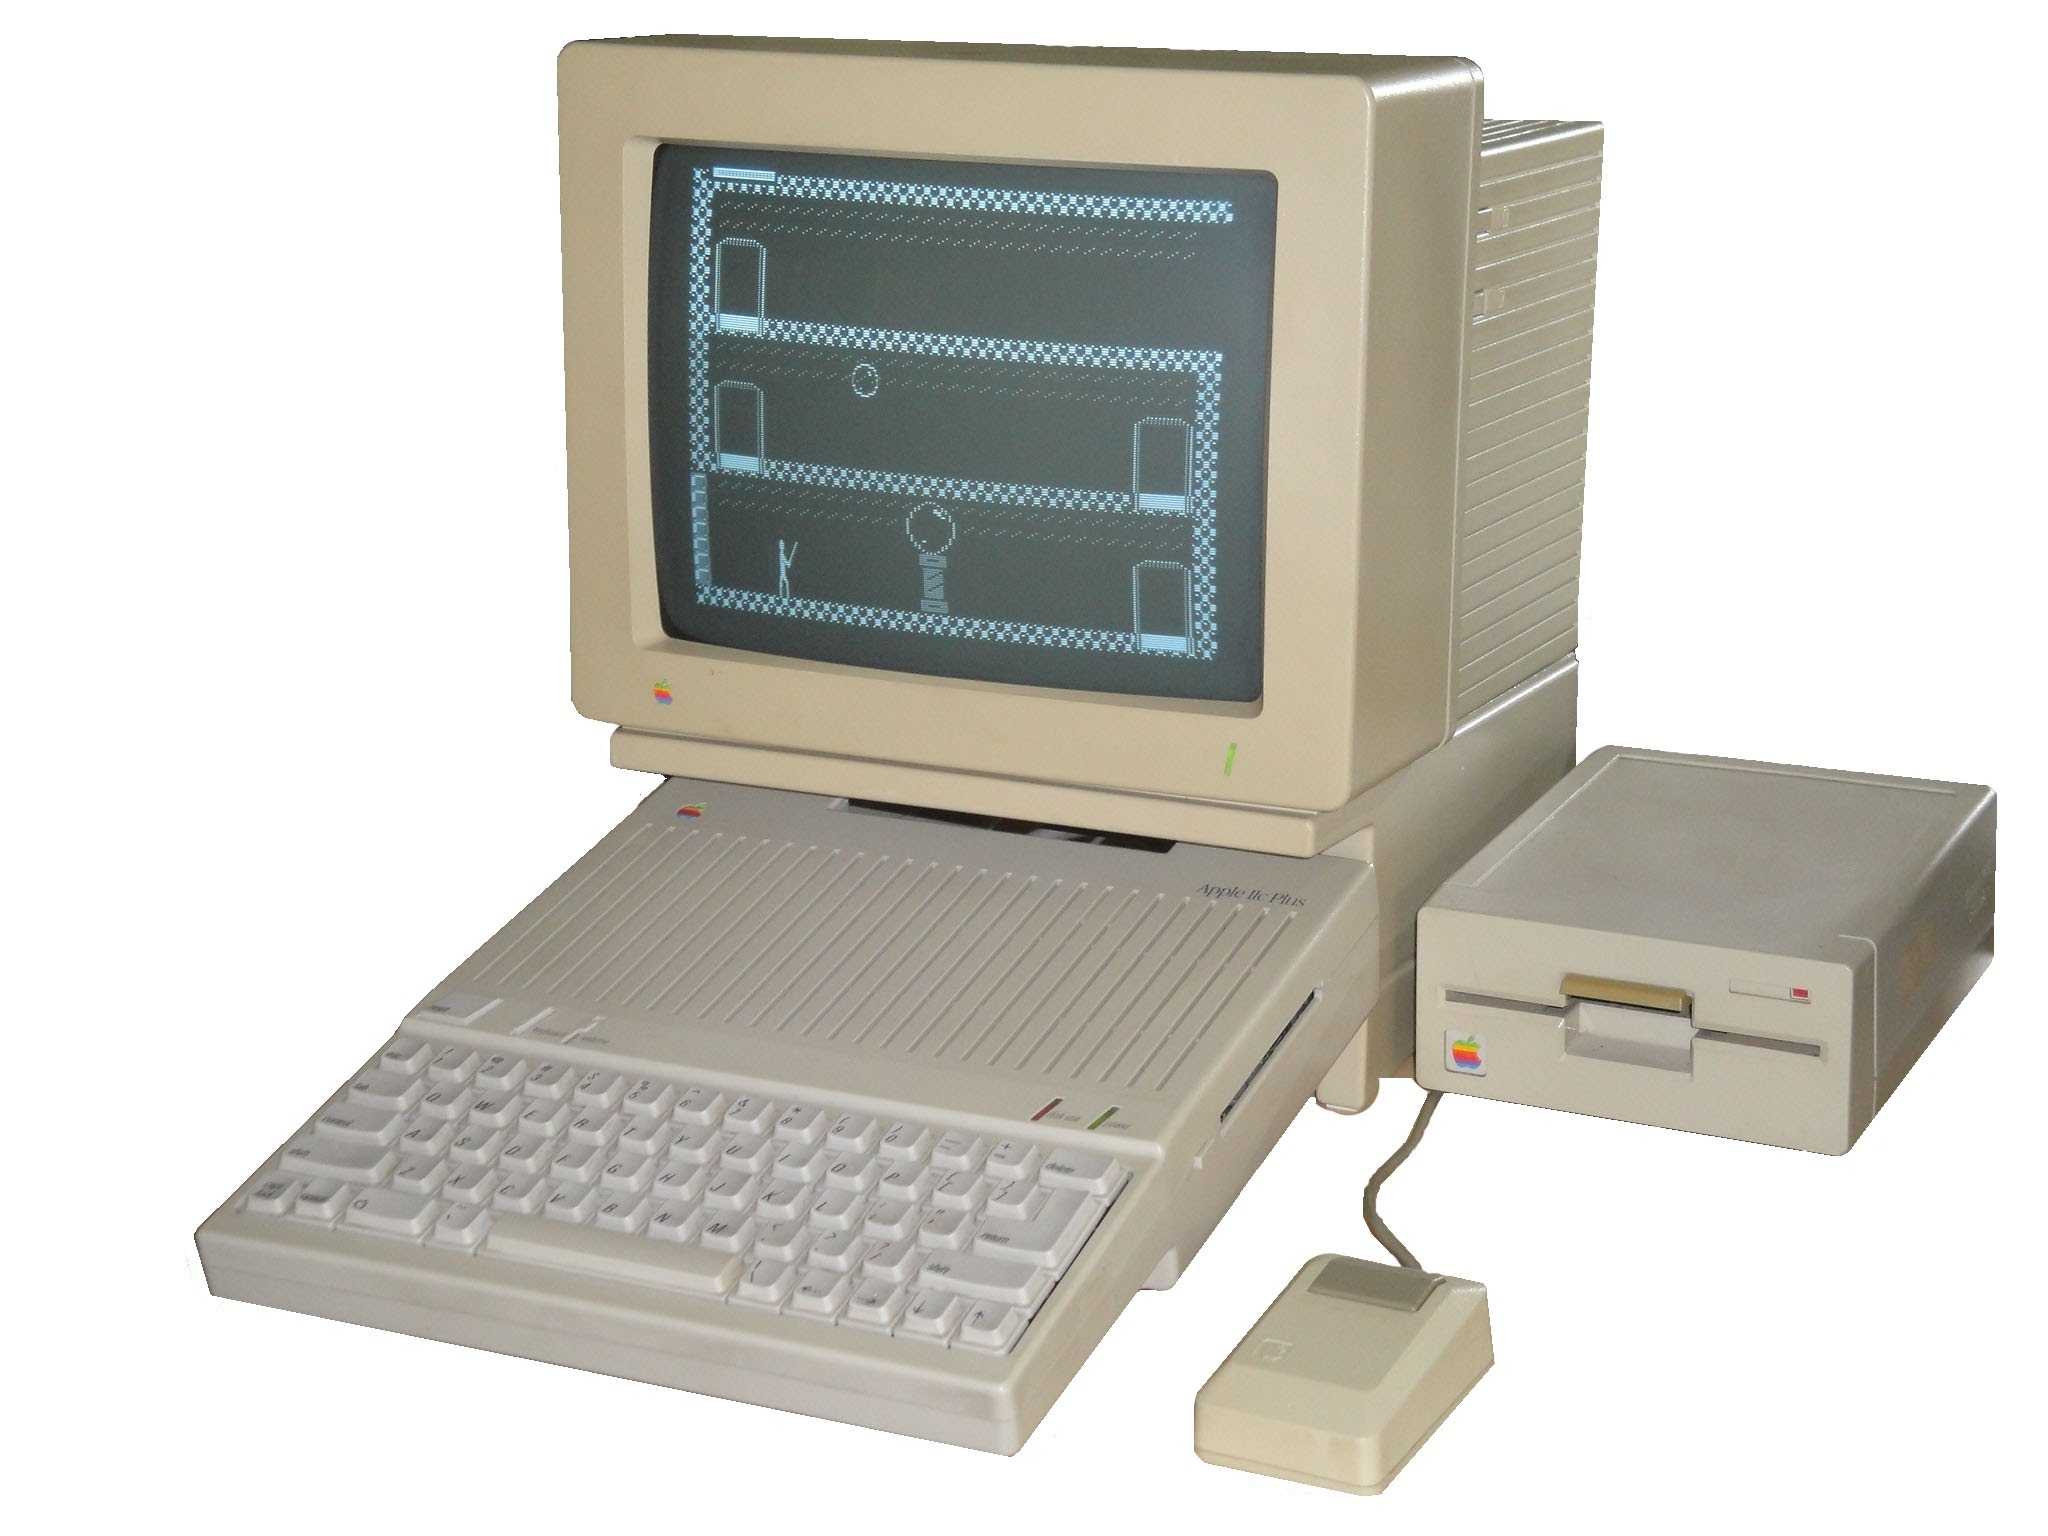 The Apple IIc Plus was the sixth and final model in the Apple II line.